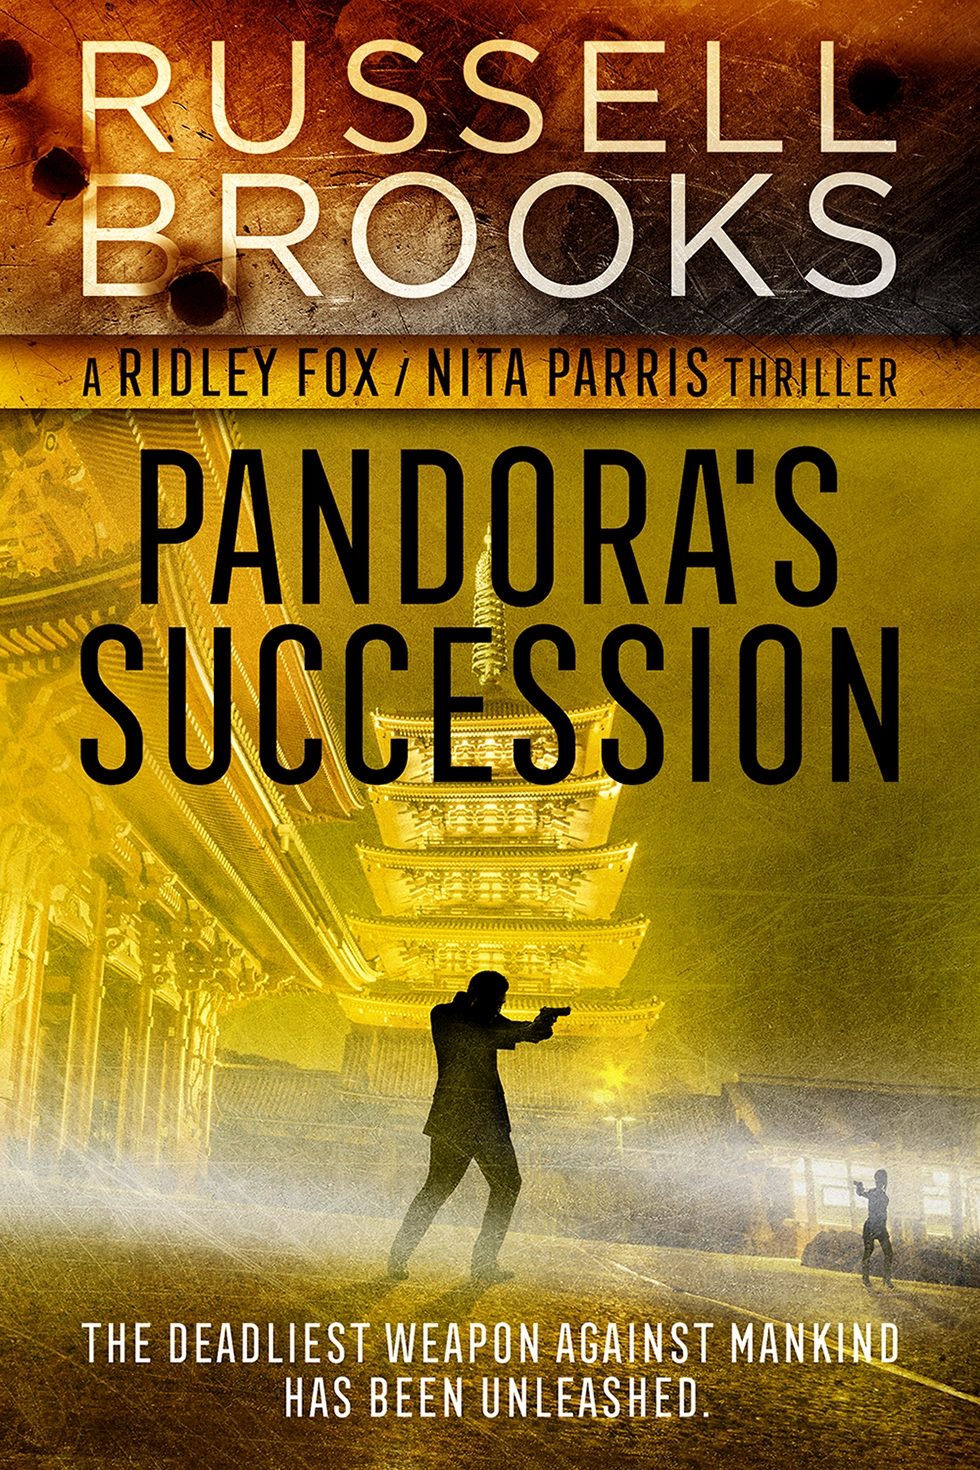 Buy Pandora's Succession Now, Pandora's Succession by Russell Brooks, authors similar to Lee Child, authors similar to Michael Connelly, books similar to Jack Reacher, new books similar to Jack Reacher, authors similar to Barry Eisler, new books similar to Jack Reacher, authors similar to Barry Eisler, spy books in a series, Black authors who write thrillers, Black thriller authors, black thriller writers, books with Black protagonists, international spy book